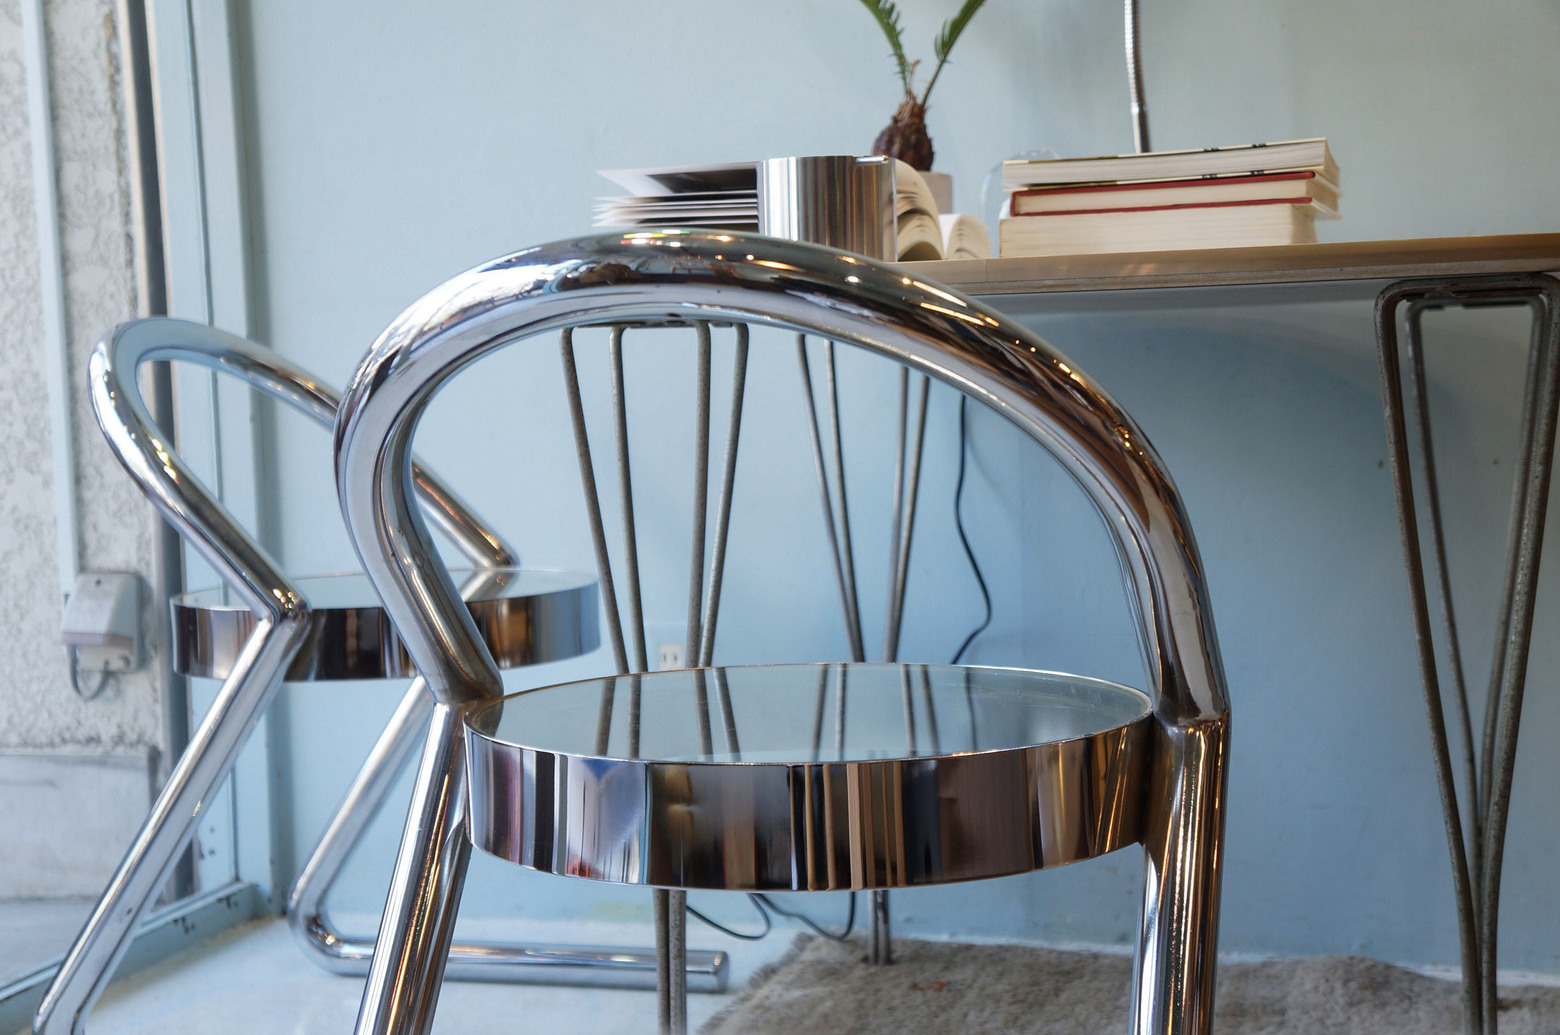 Post Modern Style Glass Chrome Chair/ガラスチェア 椅子 ポストモダン イタリアンモダン ミッドセンチュリーモダン